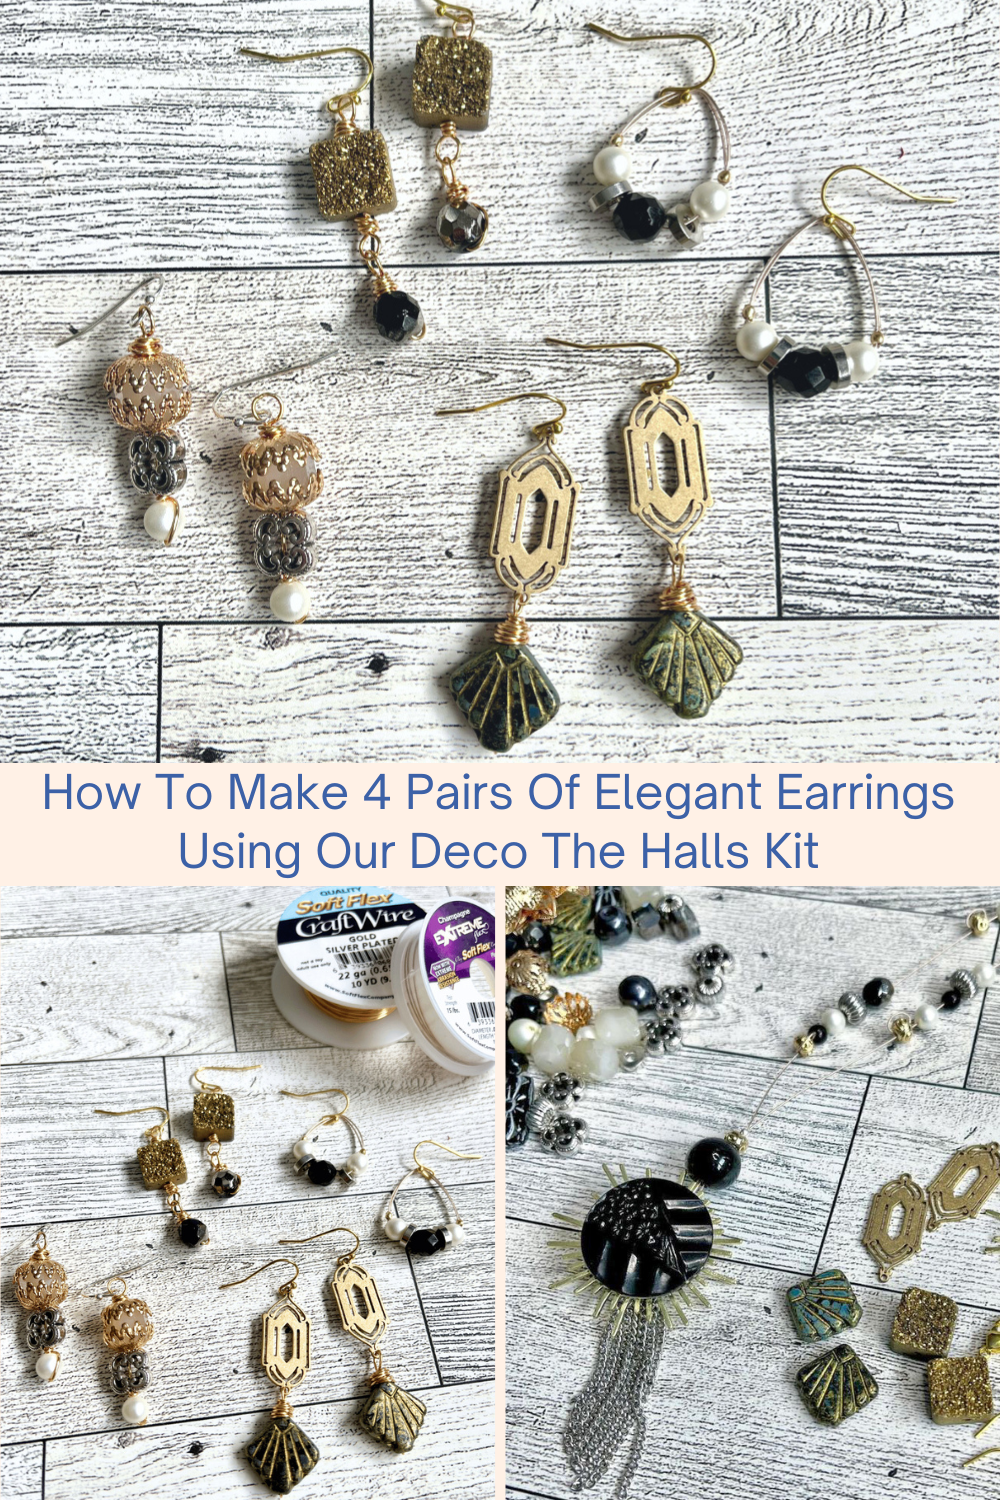 How To Make 4 Pairs Of Elegant Earrings Using Our Deco The Halls Kit Collage